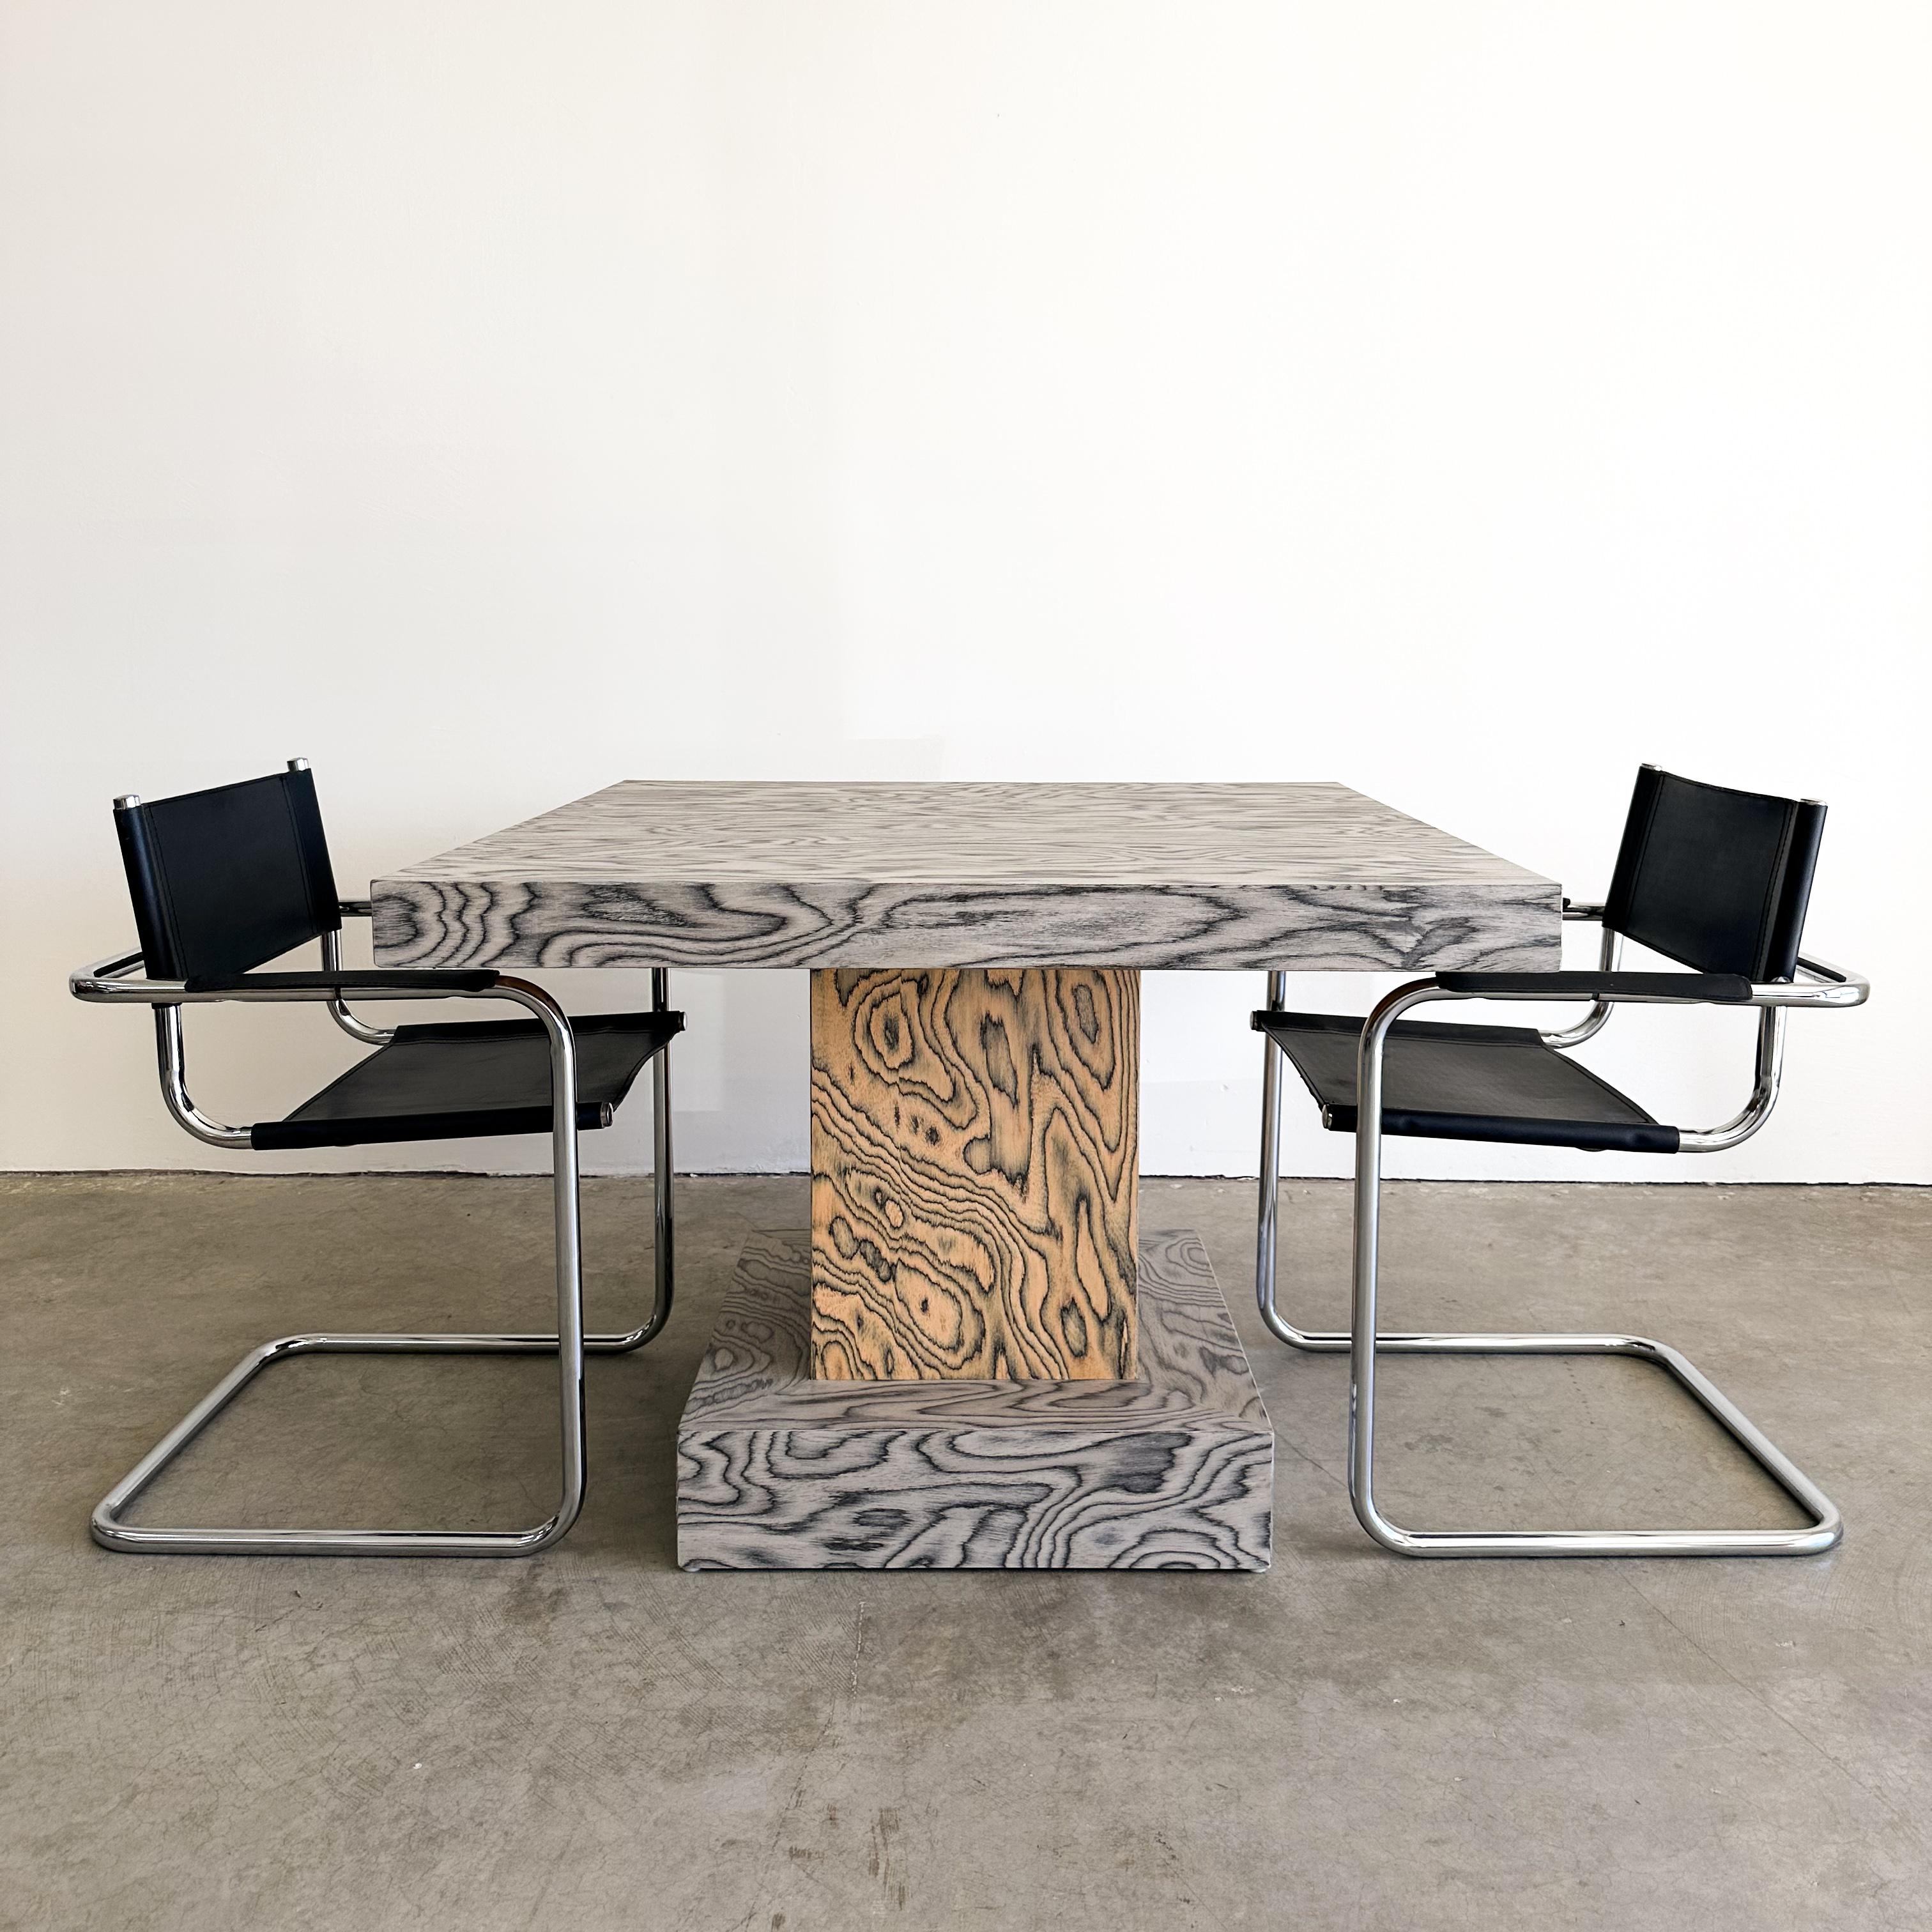 Vintage Square Dining Table/Games Table featuring Ettore Sottsass Veneer.

The vintage table has been re-veneered with the original Ettore Sottsass pattern from 1985.
ALPI manufactures the distinctive veneer.
It has been sealed with a satin finish